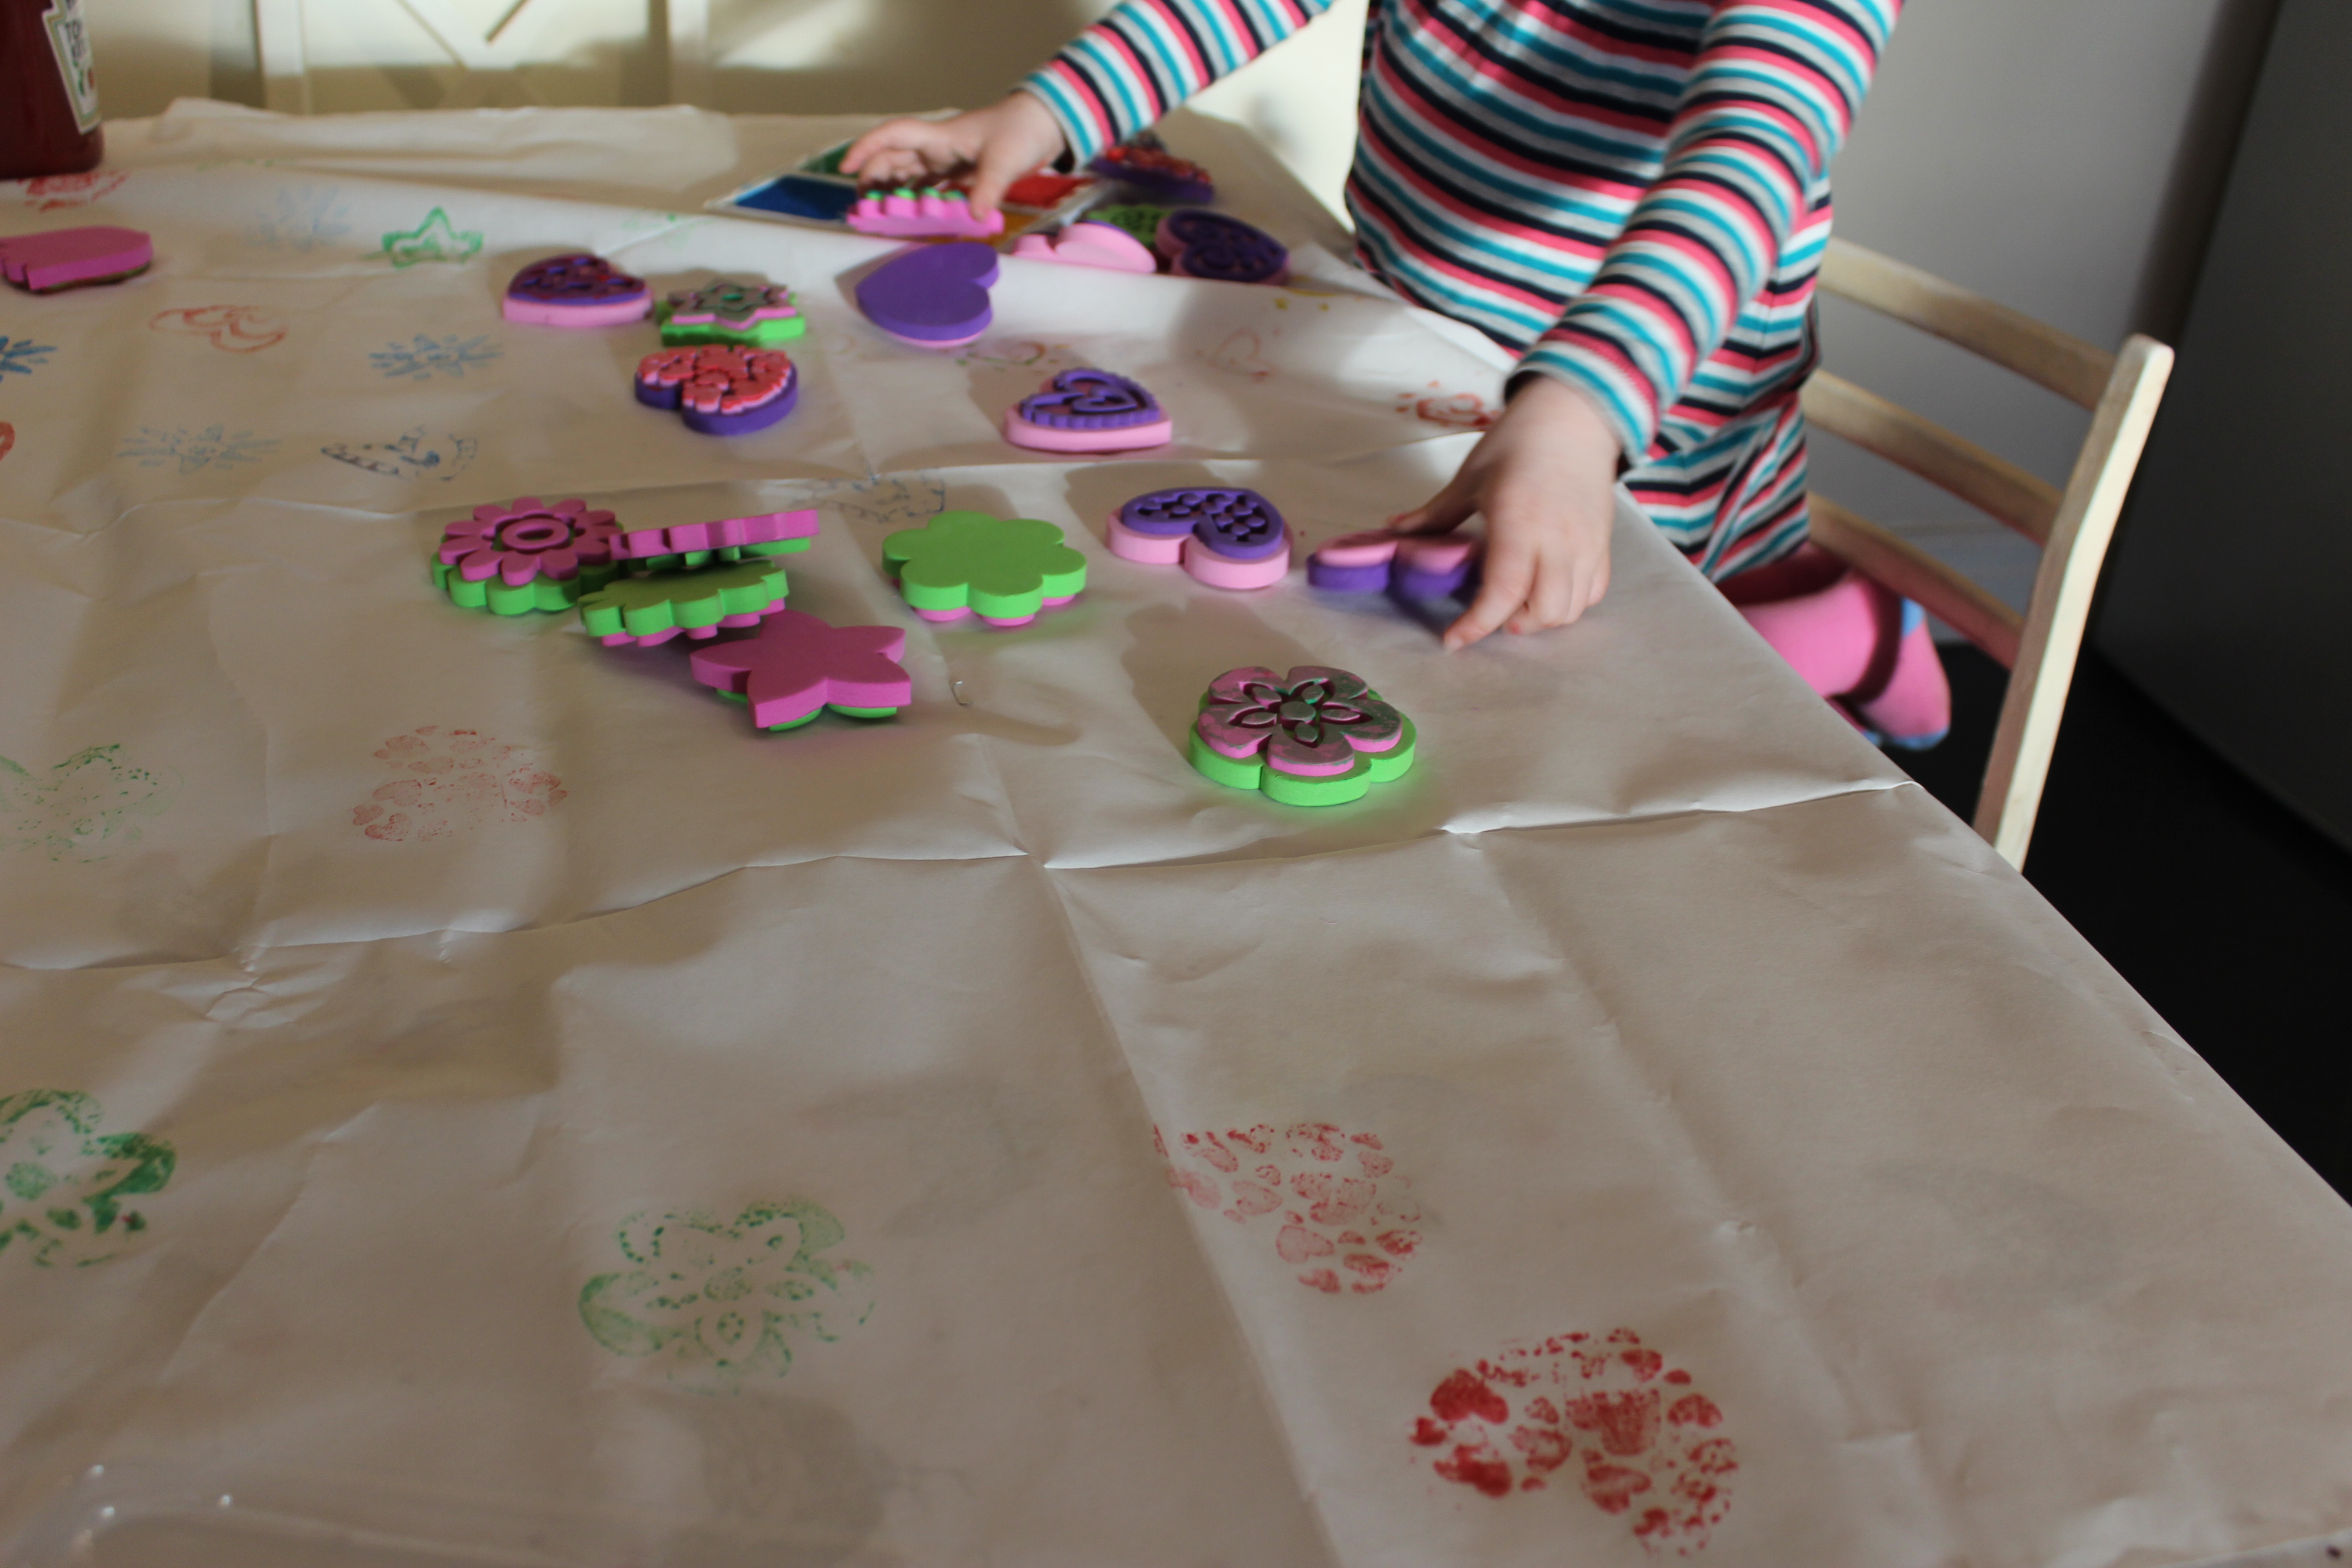 How to Make a Printed Table Cloth for Crafts